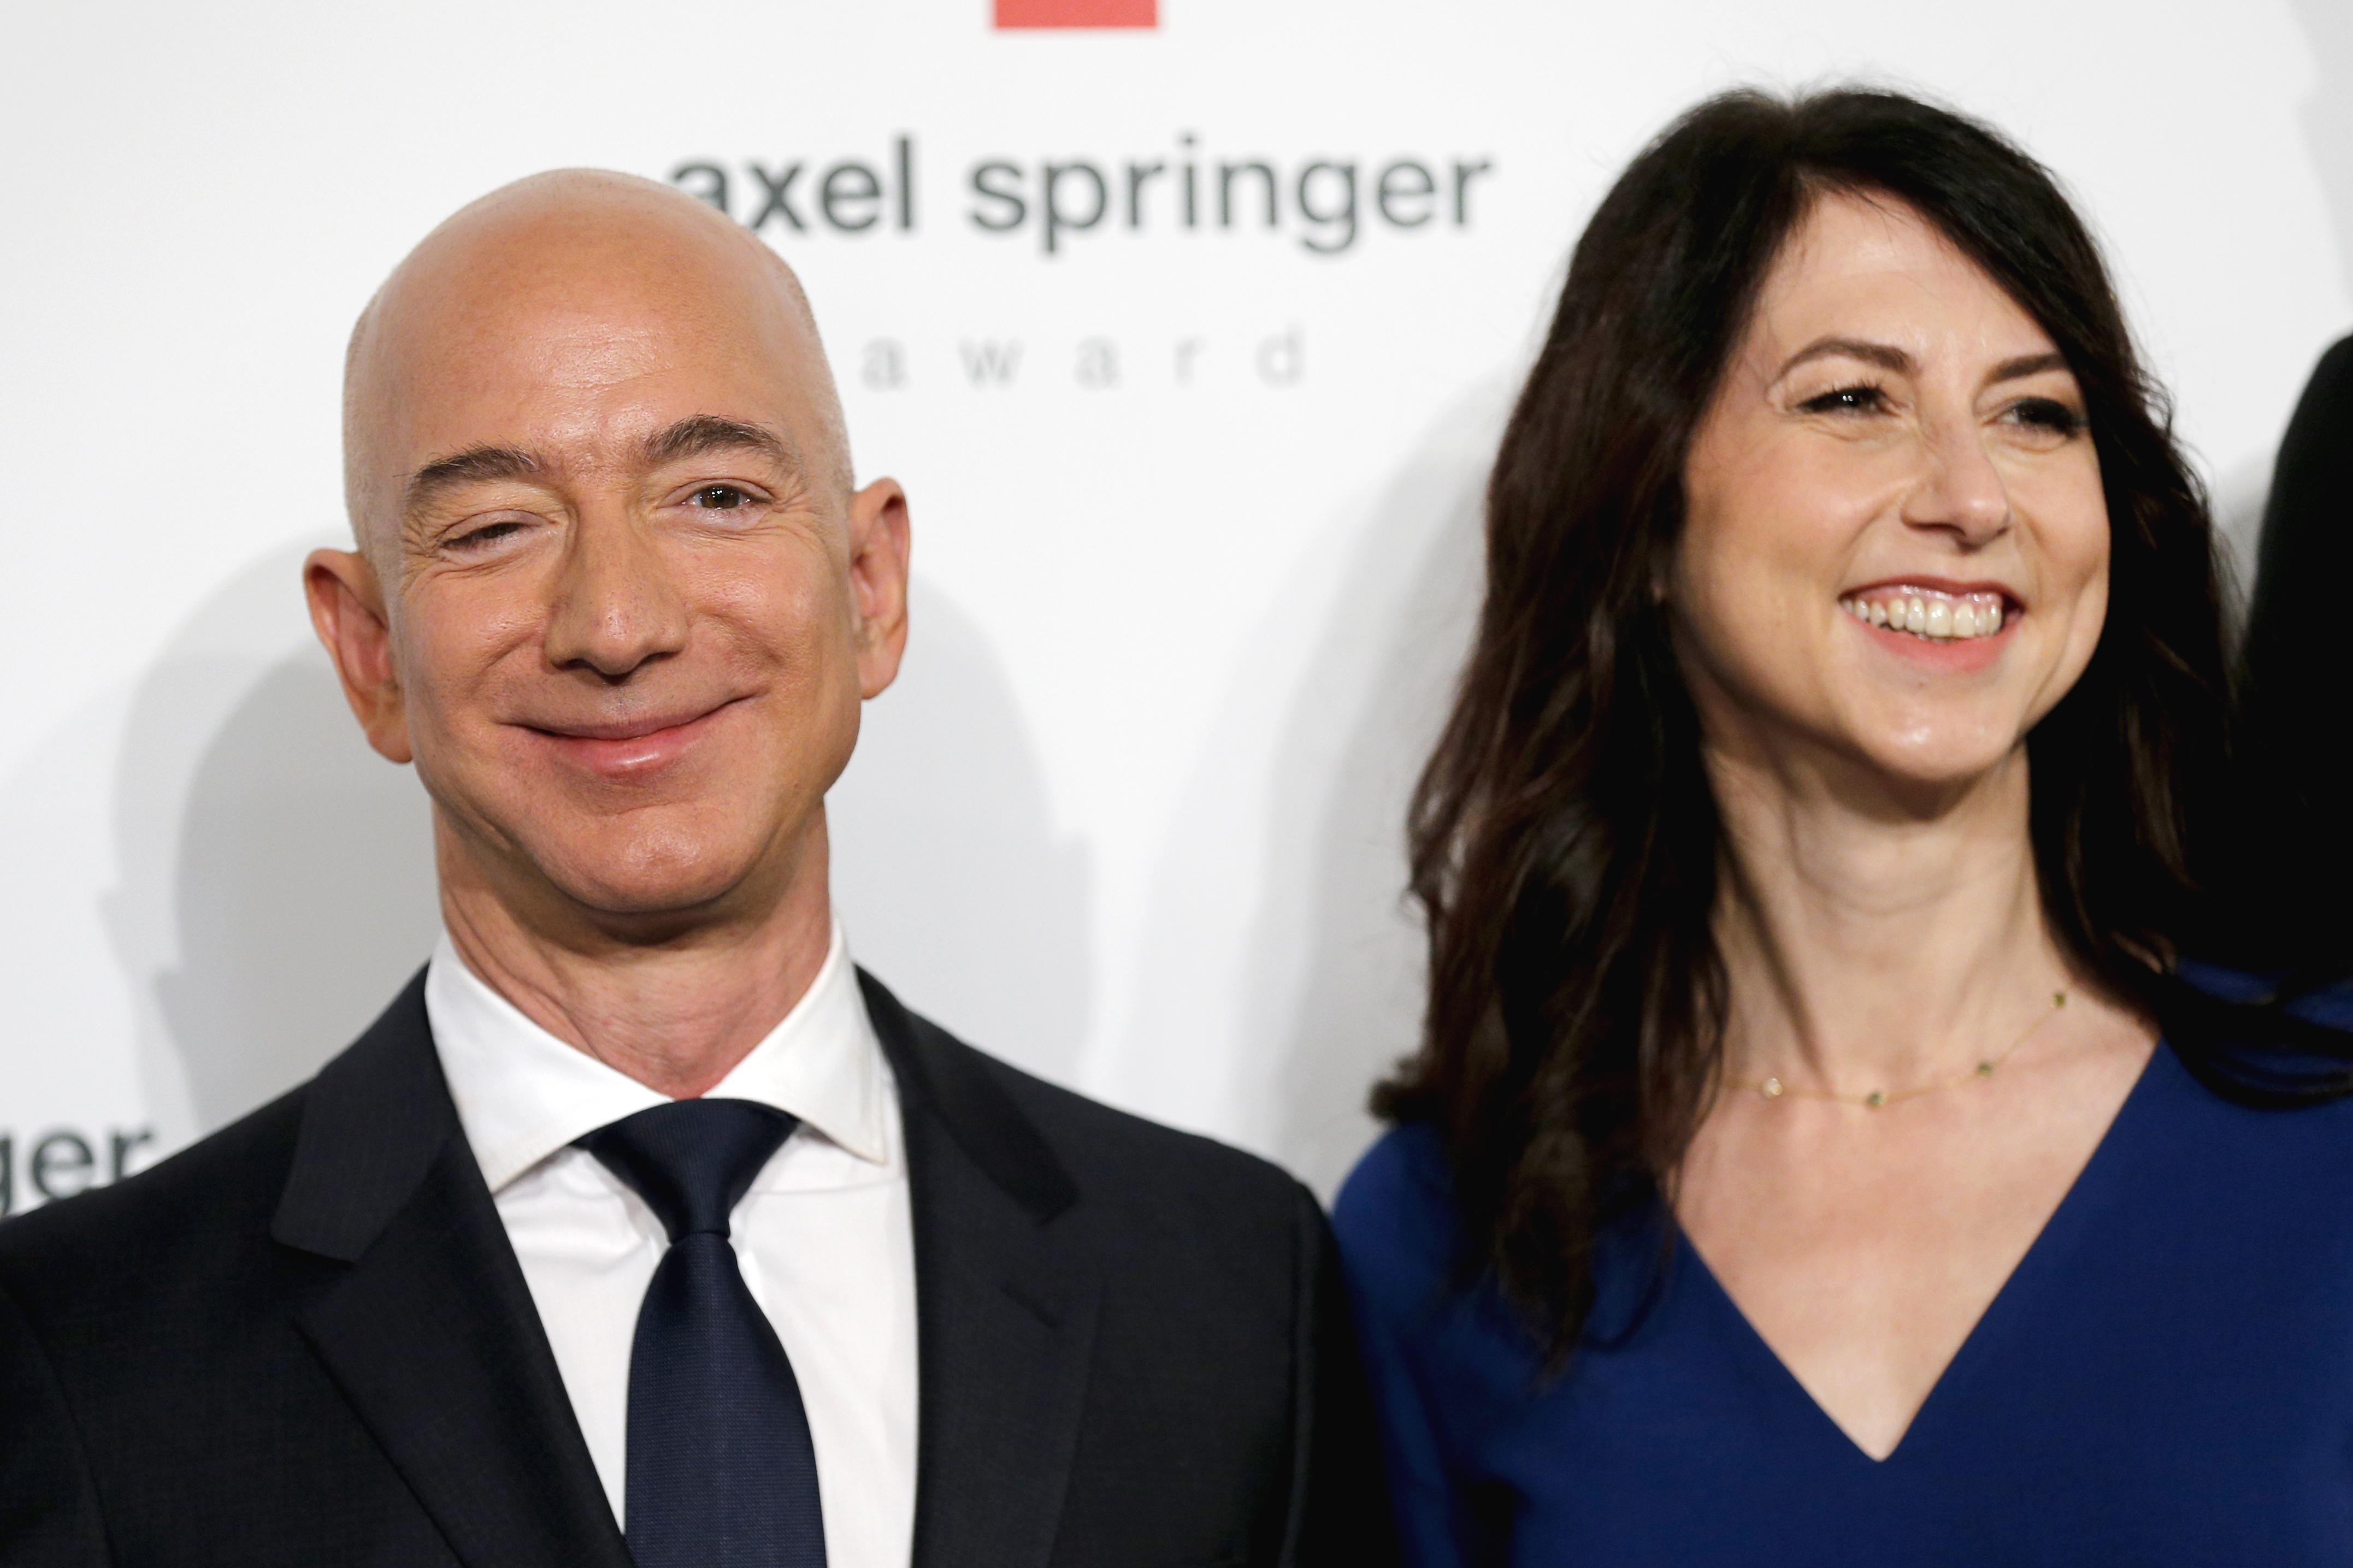 Jeff Bezos's Divorce Could Make His Wife MacKenzie Bezos the Richest Woman in the World